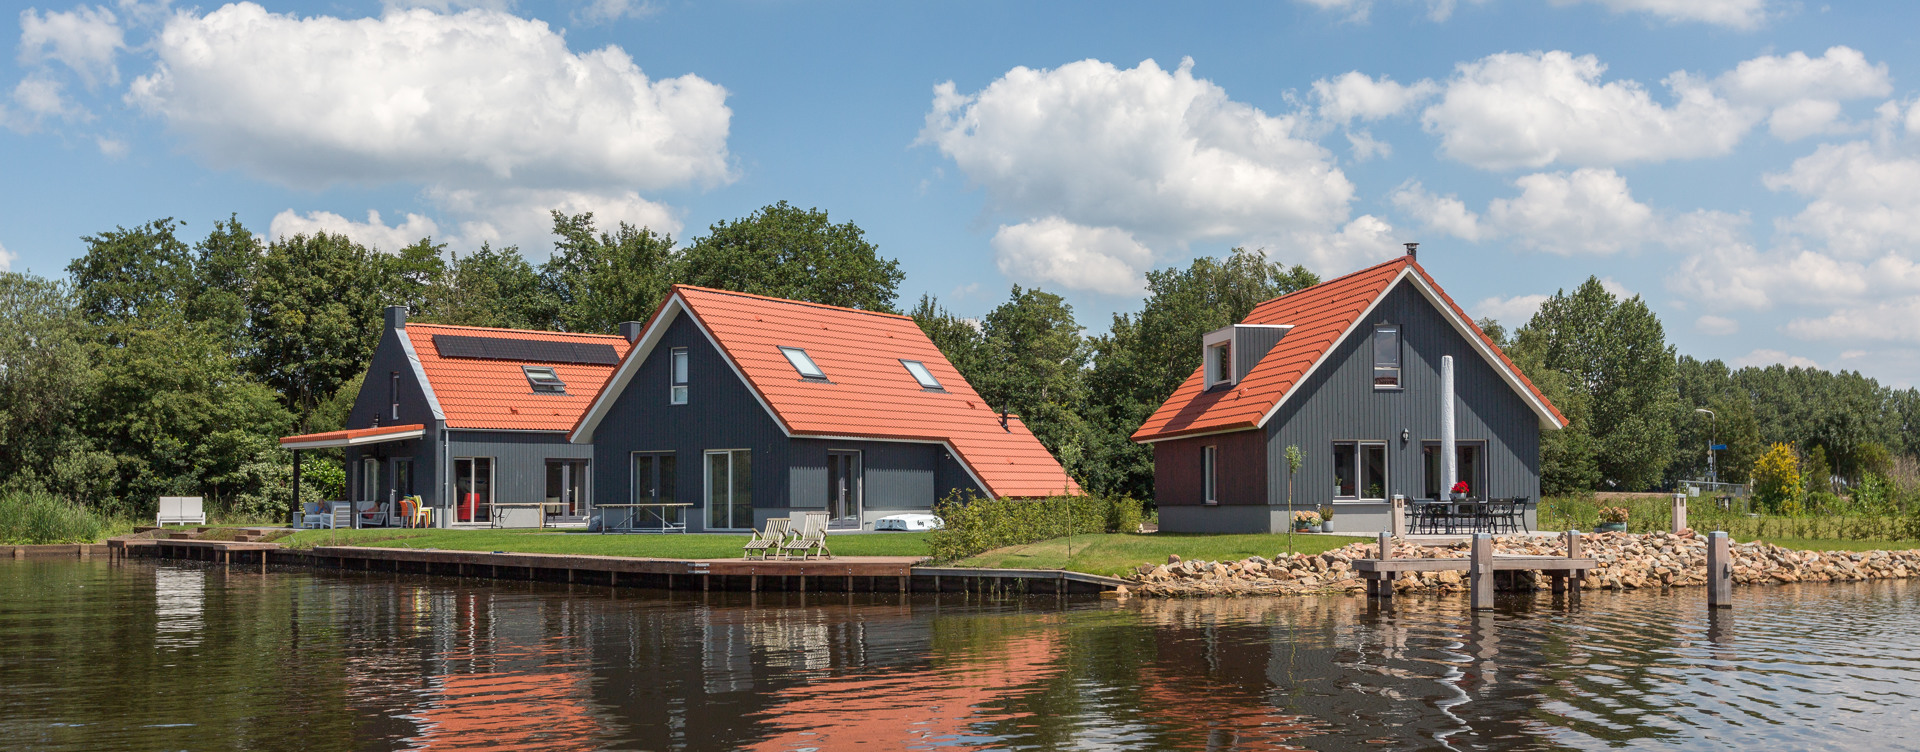 Enjoy a wonderful holiday
by the water in Friesland